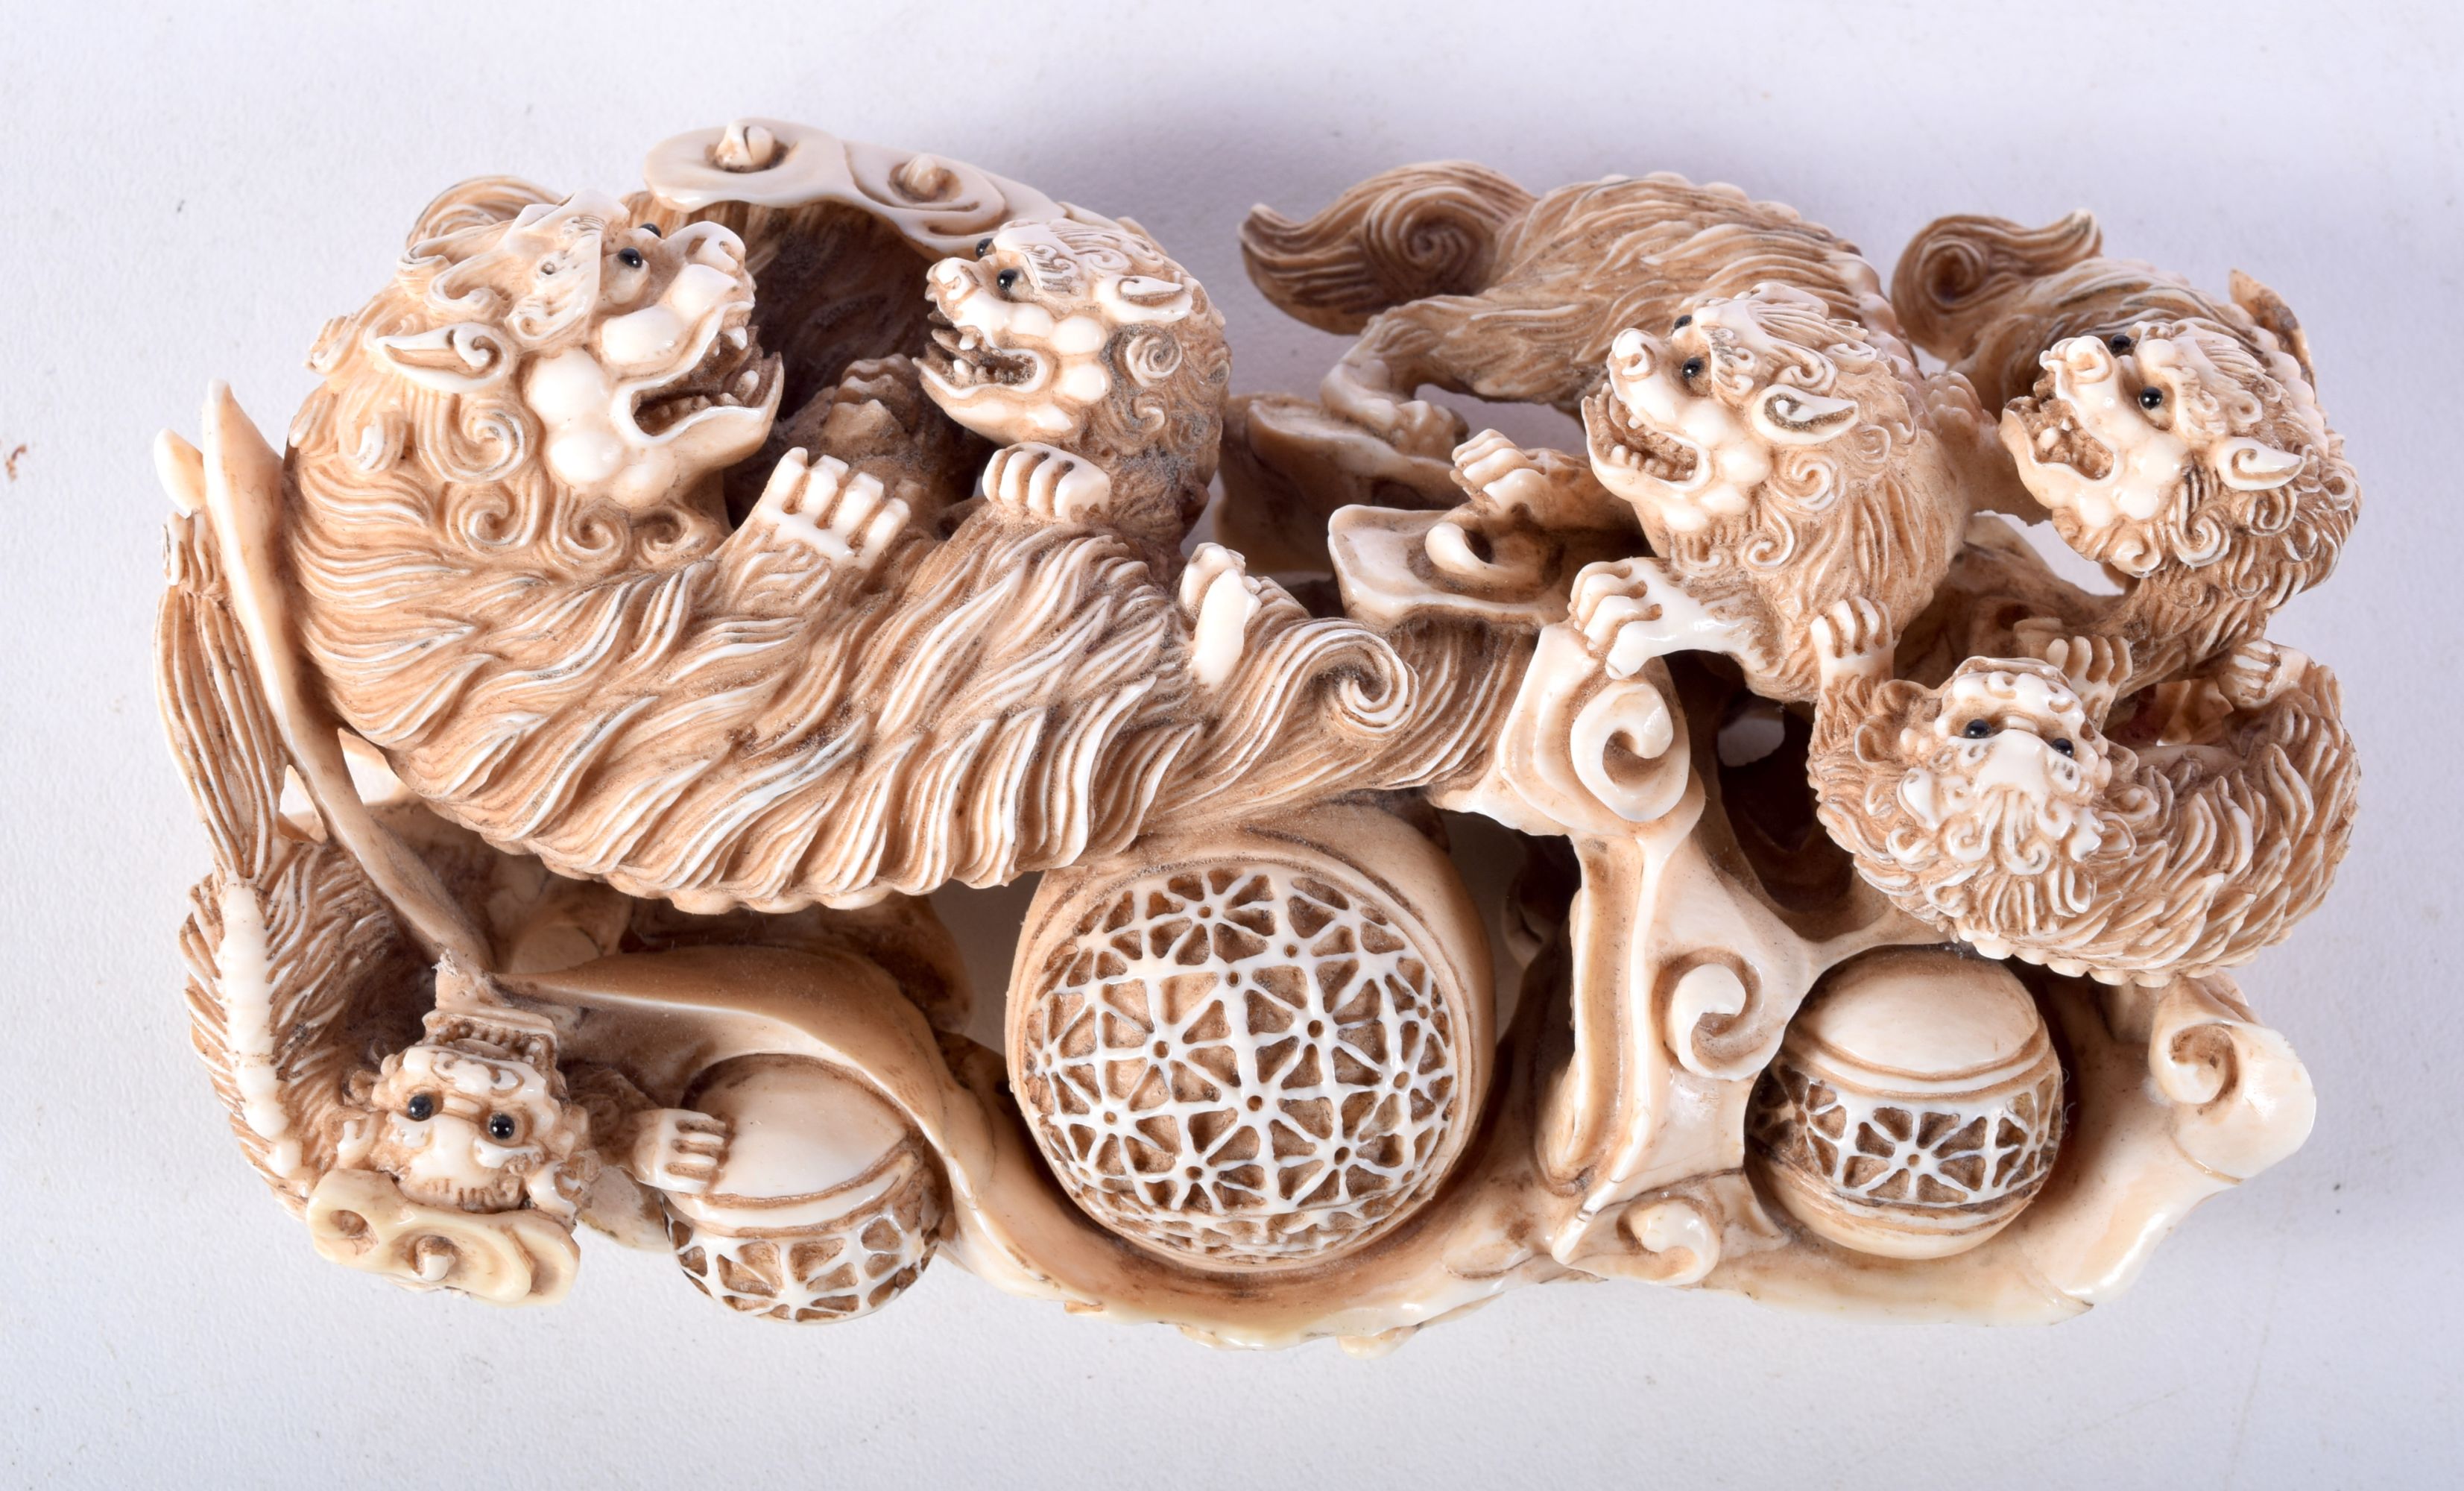 A FINE 19TH CENTURY JAPANESE MEIJI PERIOD CARVED IVORY OKIMONO modelled as numerous beasts in a play